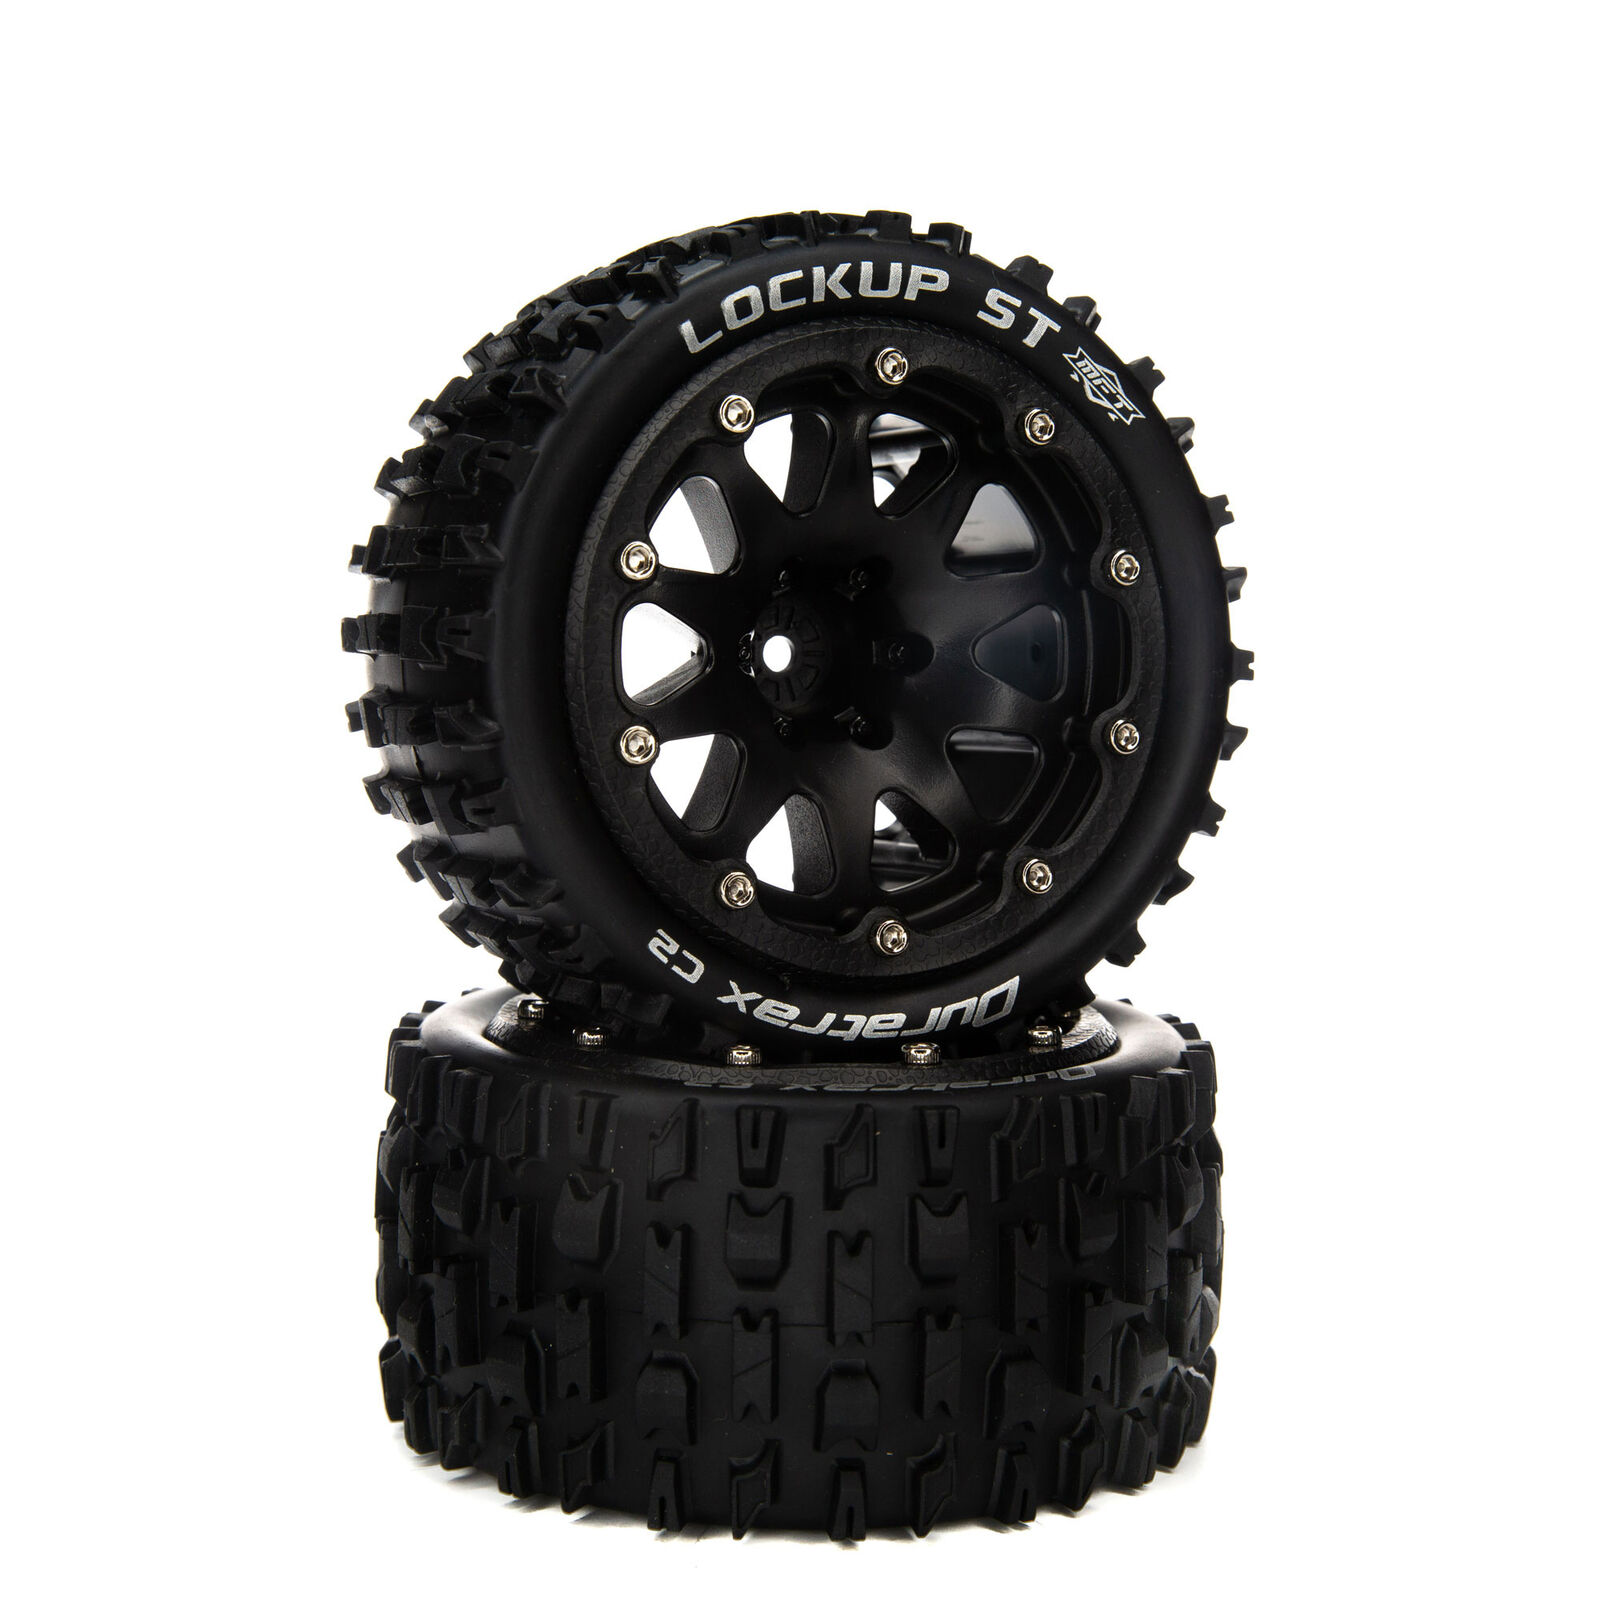 Lockup ST Belted 2.8" Mounted Front/Rear Tires, 14mm Black (2)